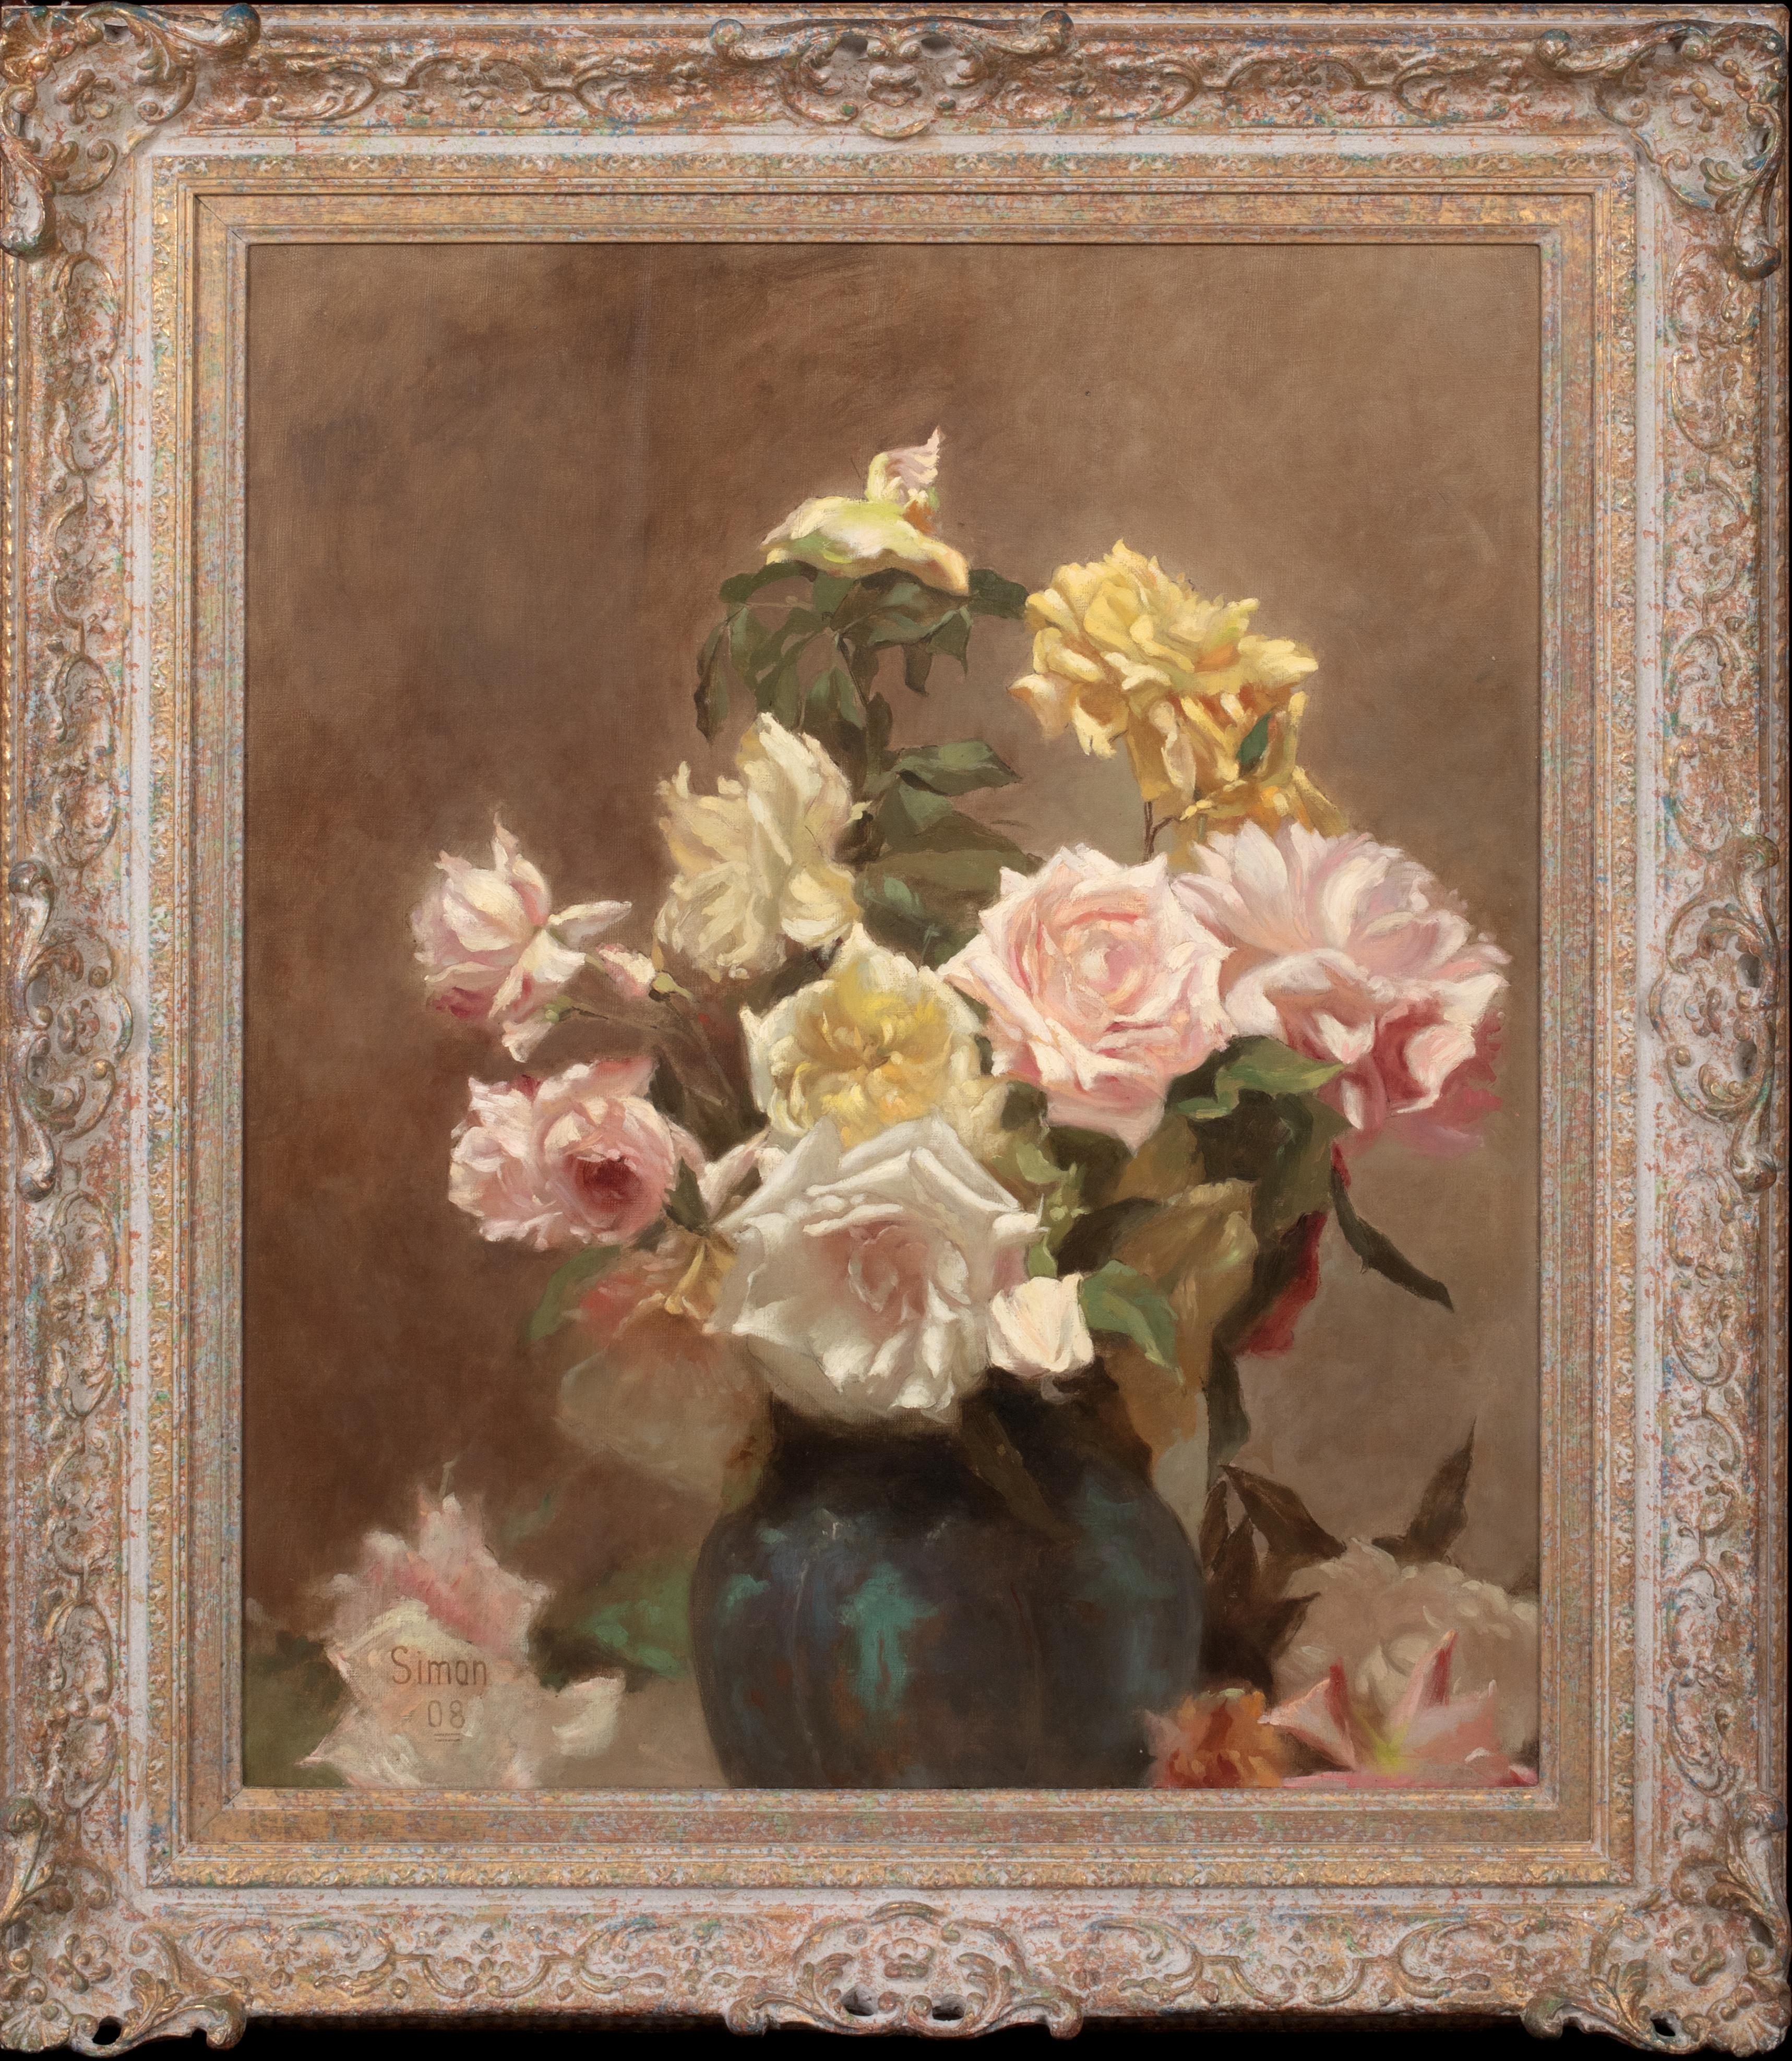 Unknown Still-Life Painting - Still Life Of Summer Roses, dated 1908   by LUCIEN SIMON (1861-1905)